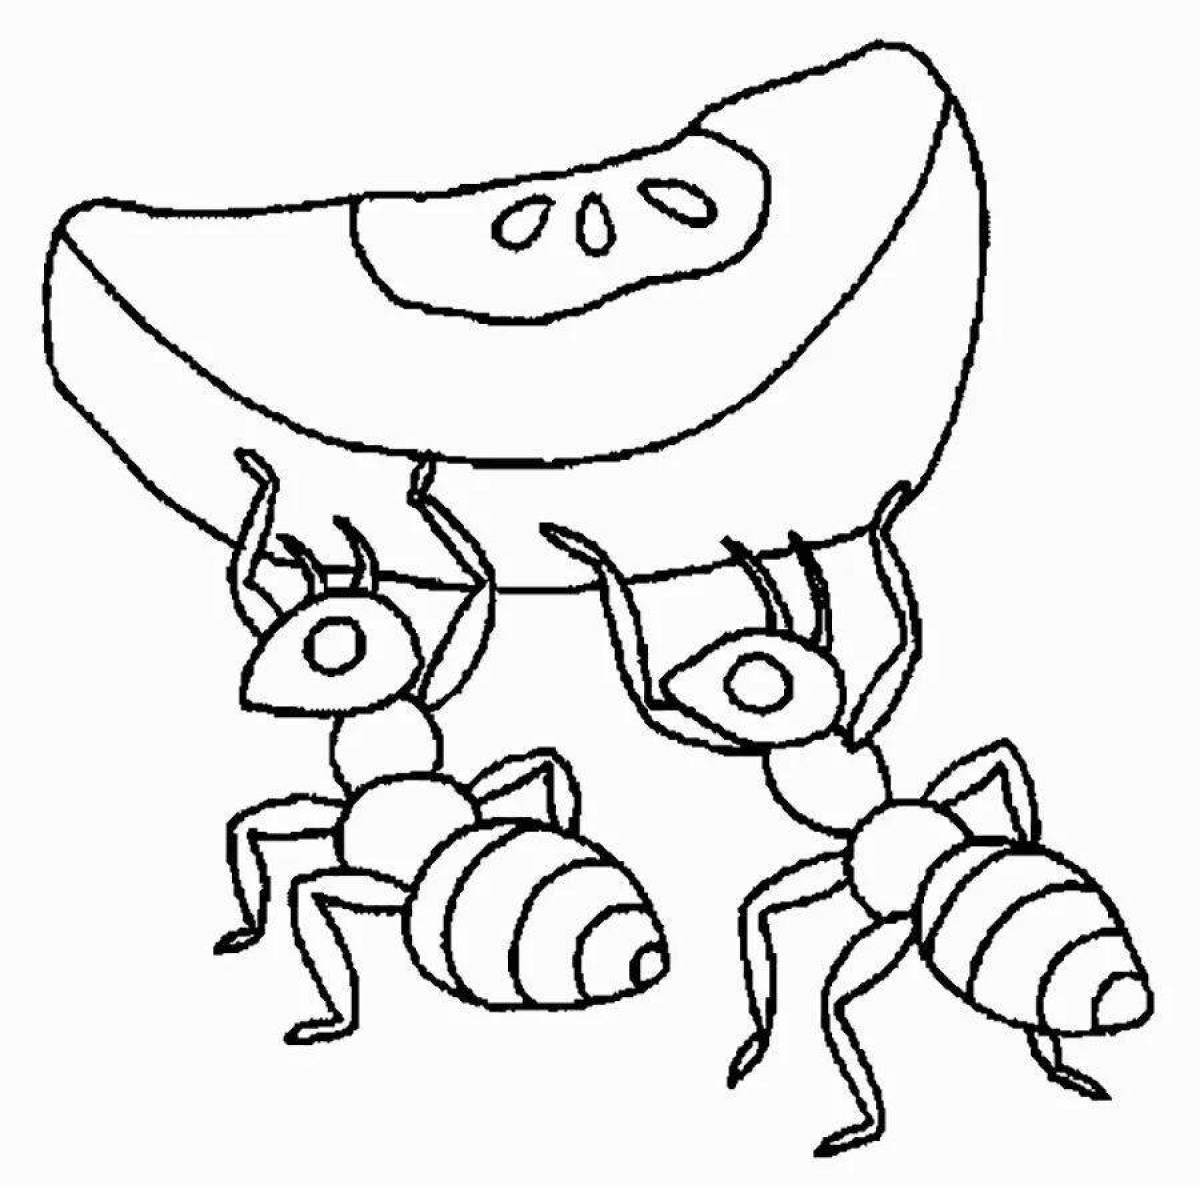 Animated drawing of an ant